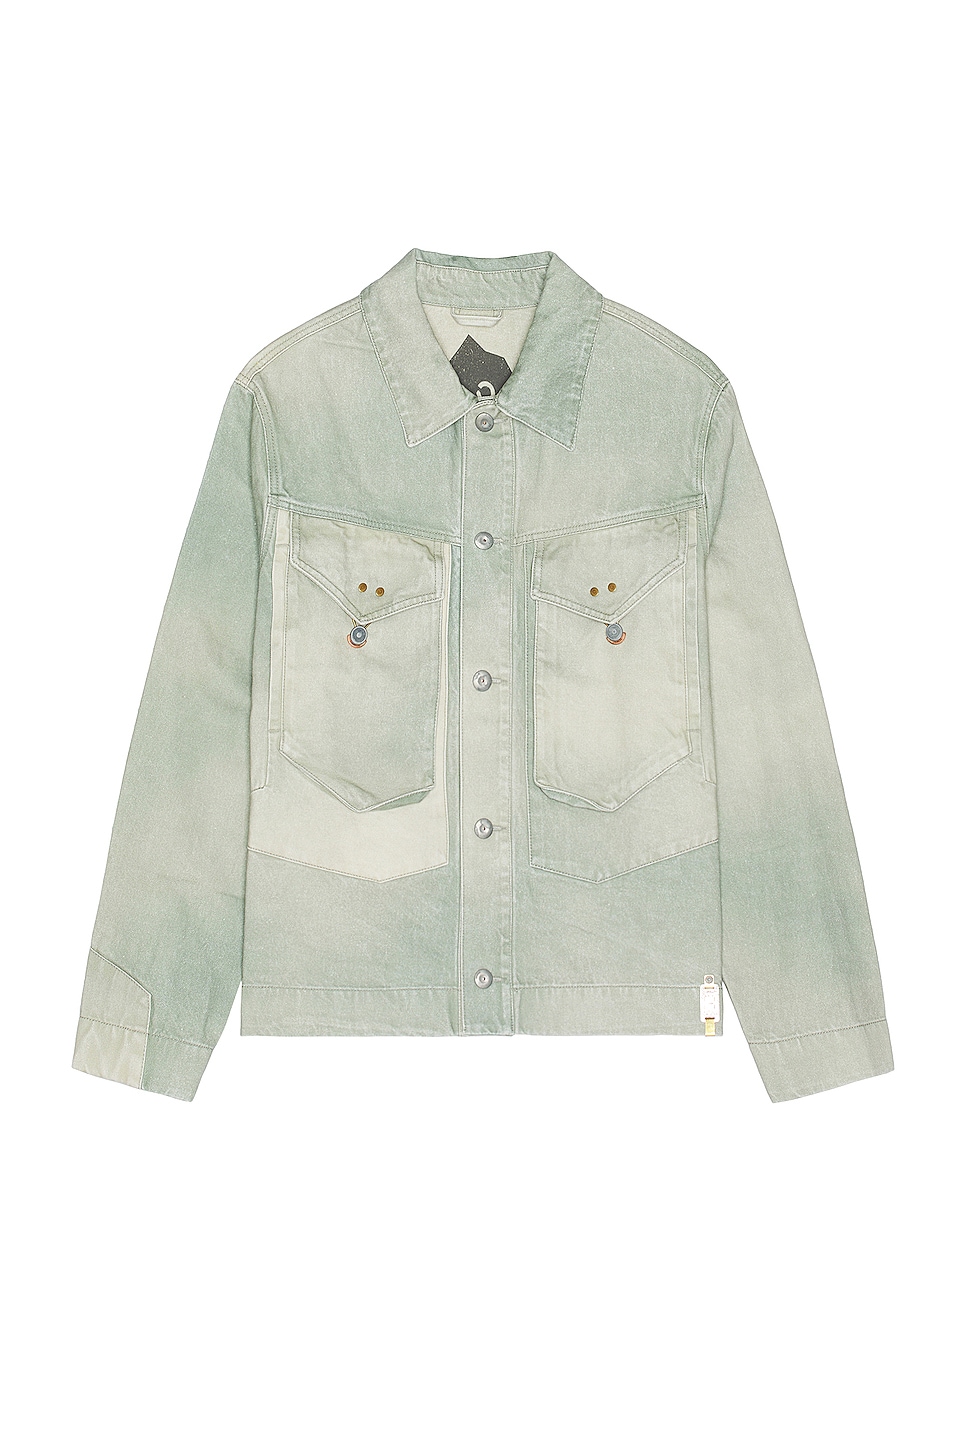 Objects IV Life Tradition Denim Jacket in Green Patina | FWRD